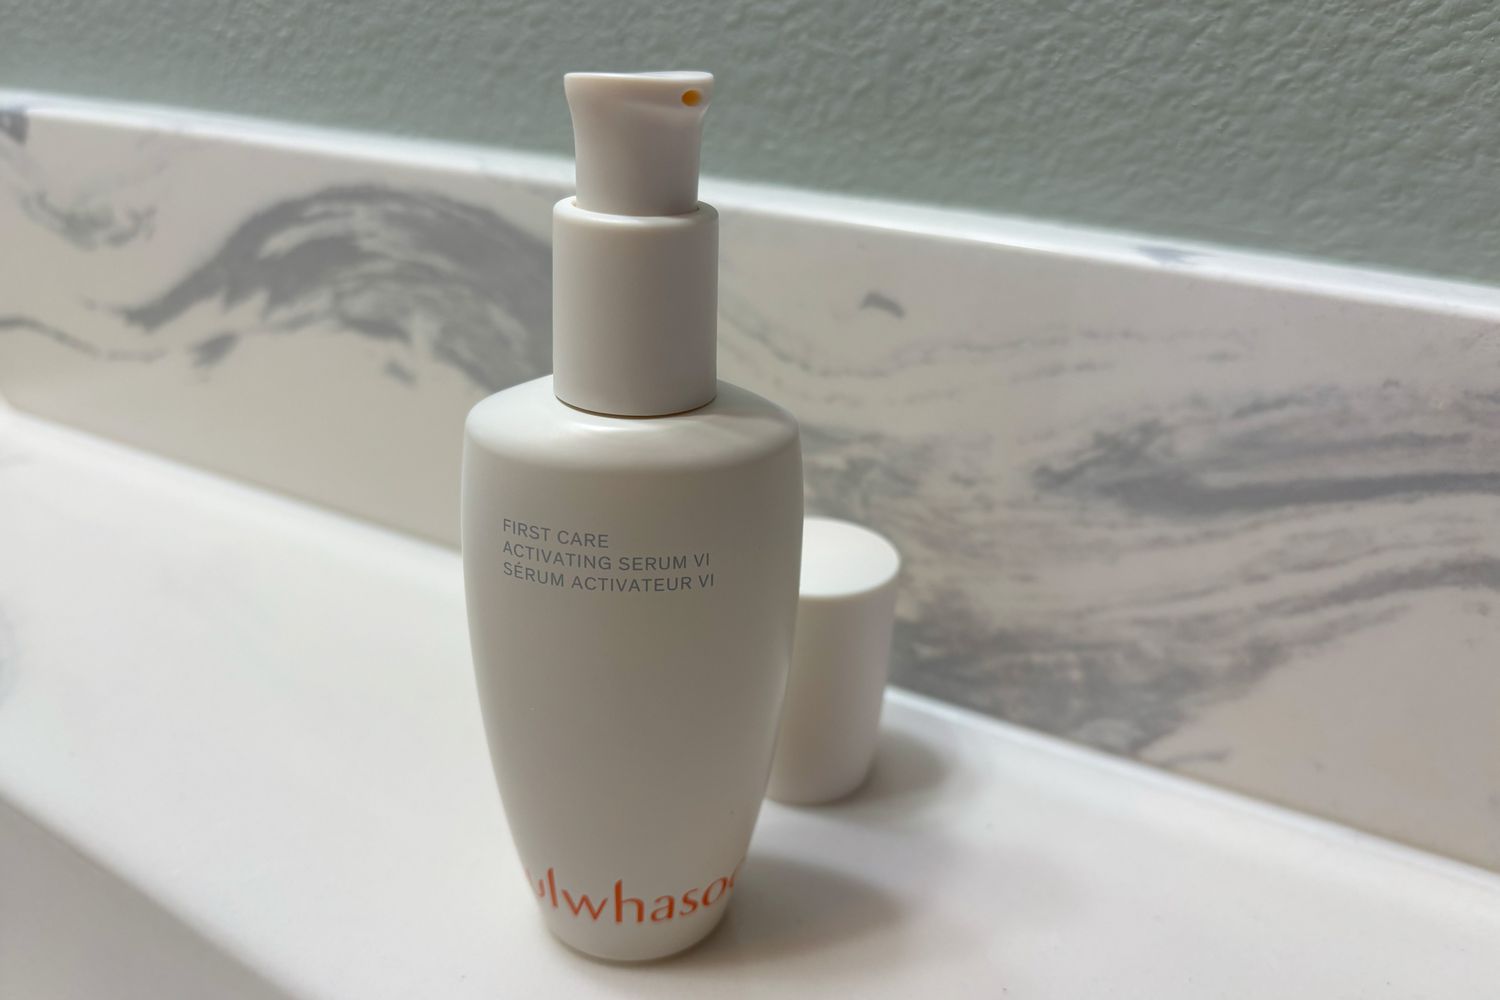 Bottle of the Sulwhasoo Anti-Aging First Care Activating Serum on countertop with top off